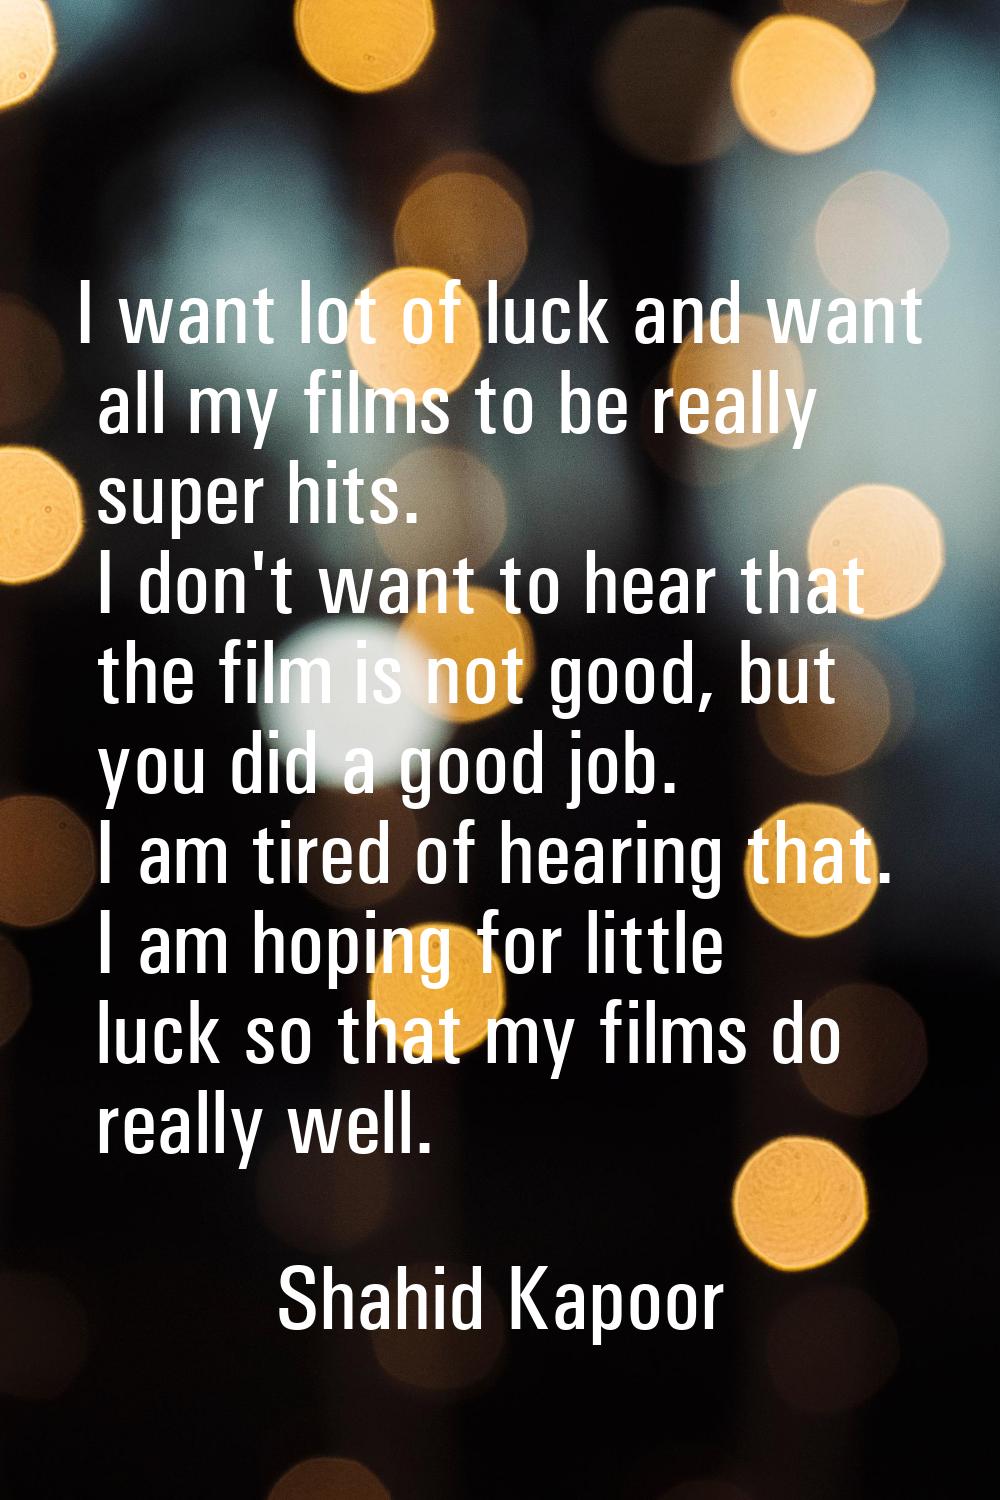 I want lot of luck and want all my films to be really super hits. I don't want to hear that the fil